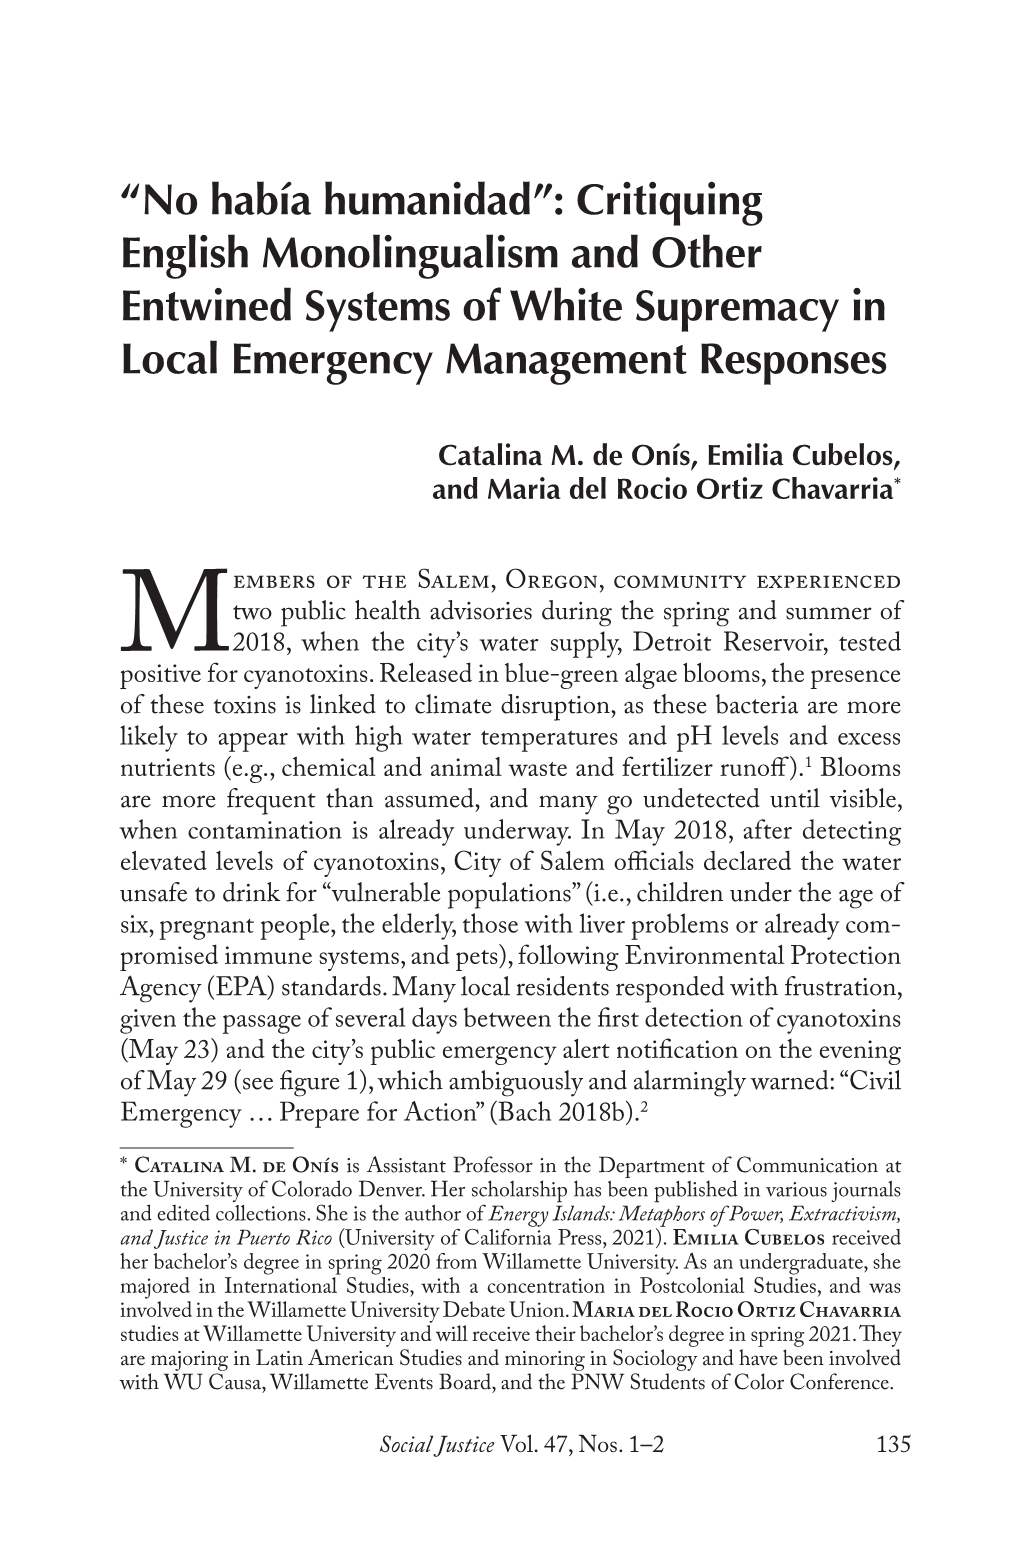 “No Había Humanidad”: Critiquing English Monolingualism and Other Entwined Systems of White Supremacy in Local Emergency Management Responses